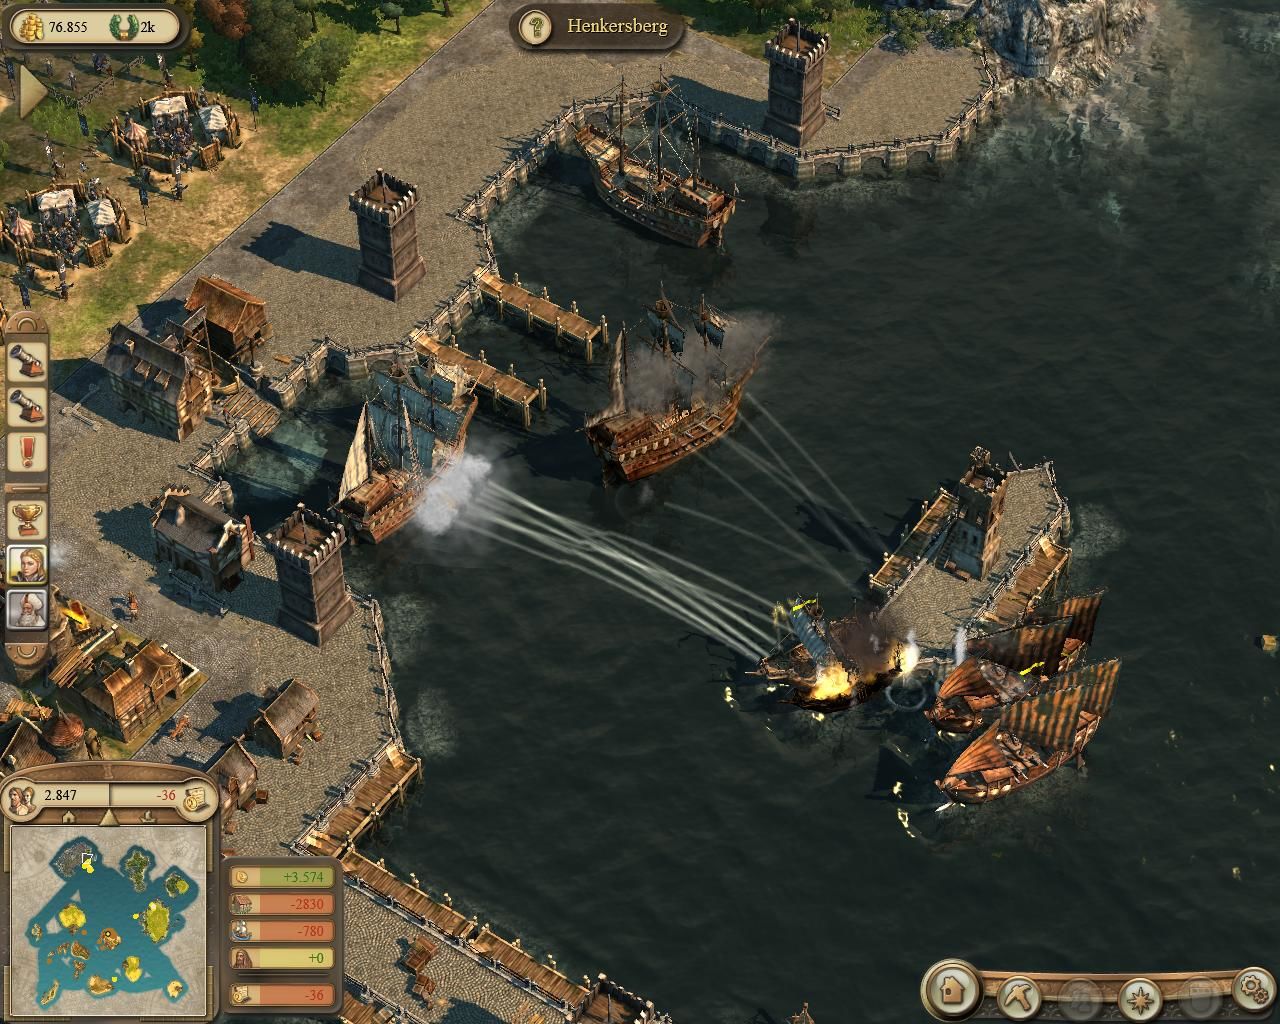 Foone As Well As Dawn Of Discovery Aka Anno 1404